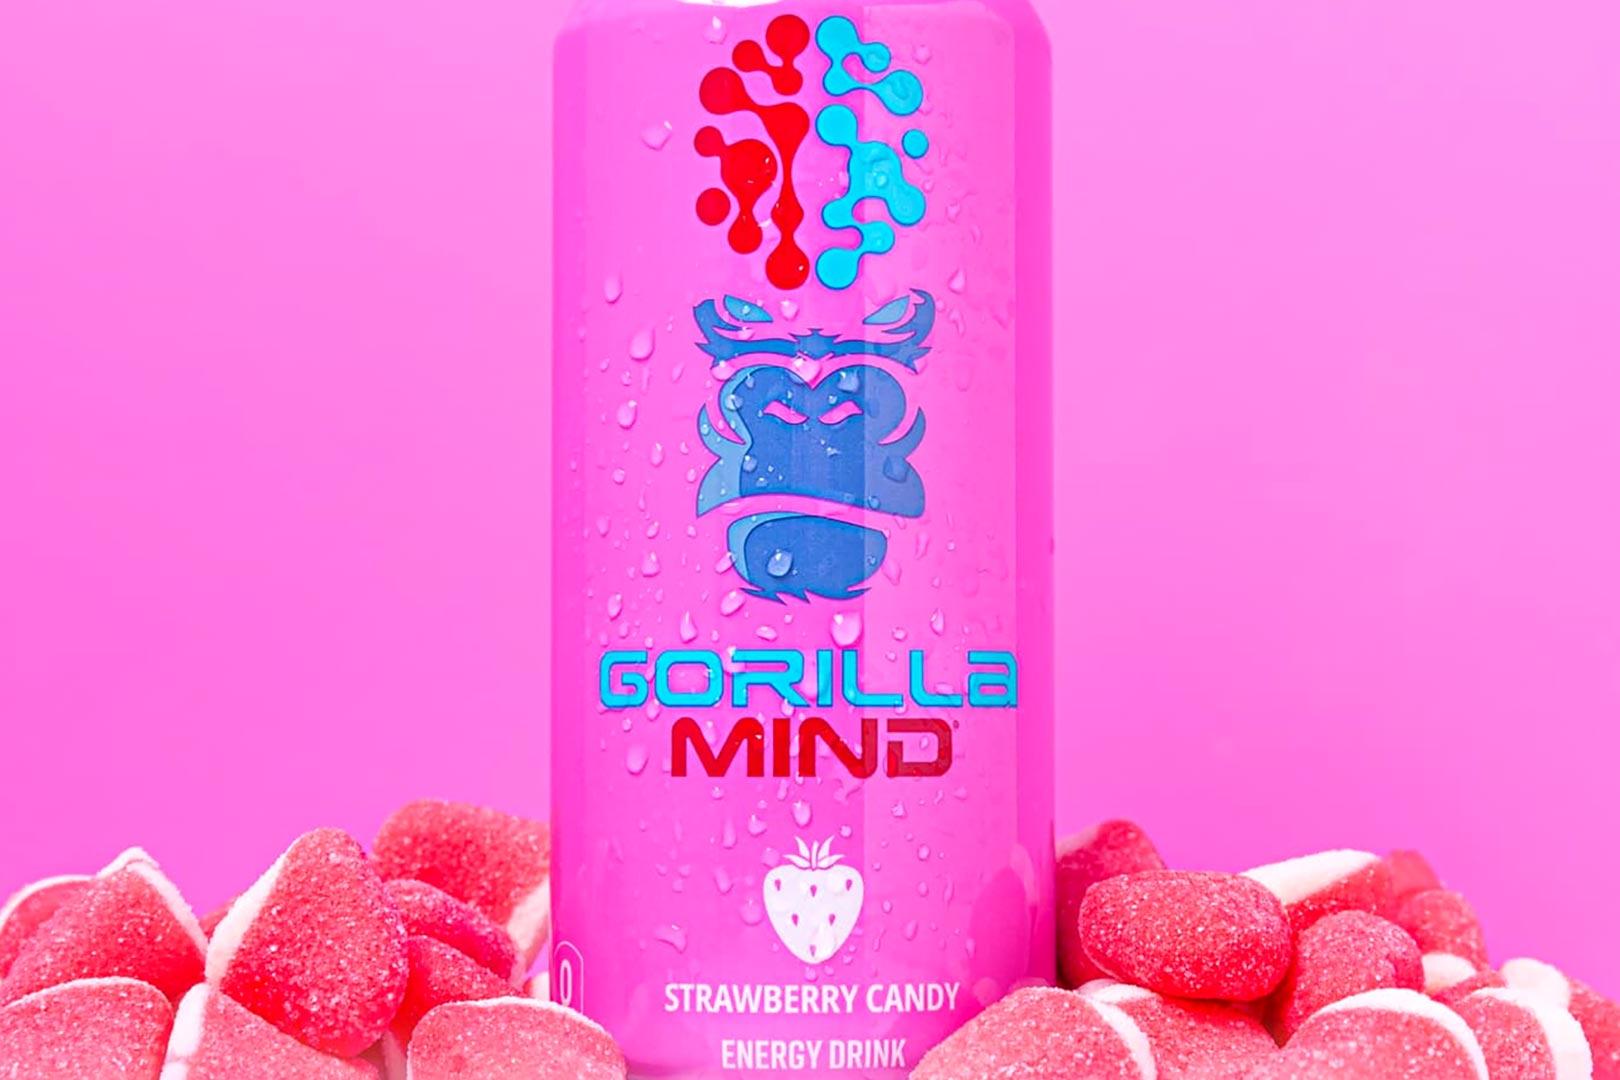 Where To Buy Strawberry Candy Gorilla Mind Energy